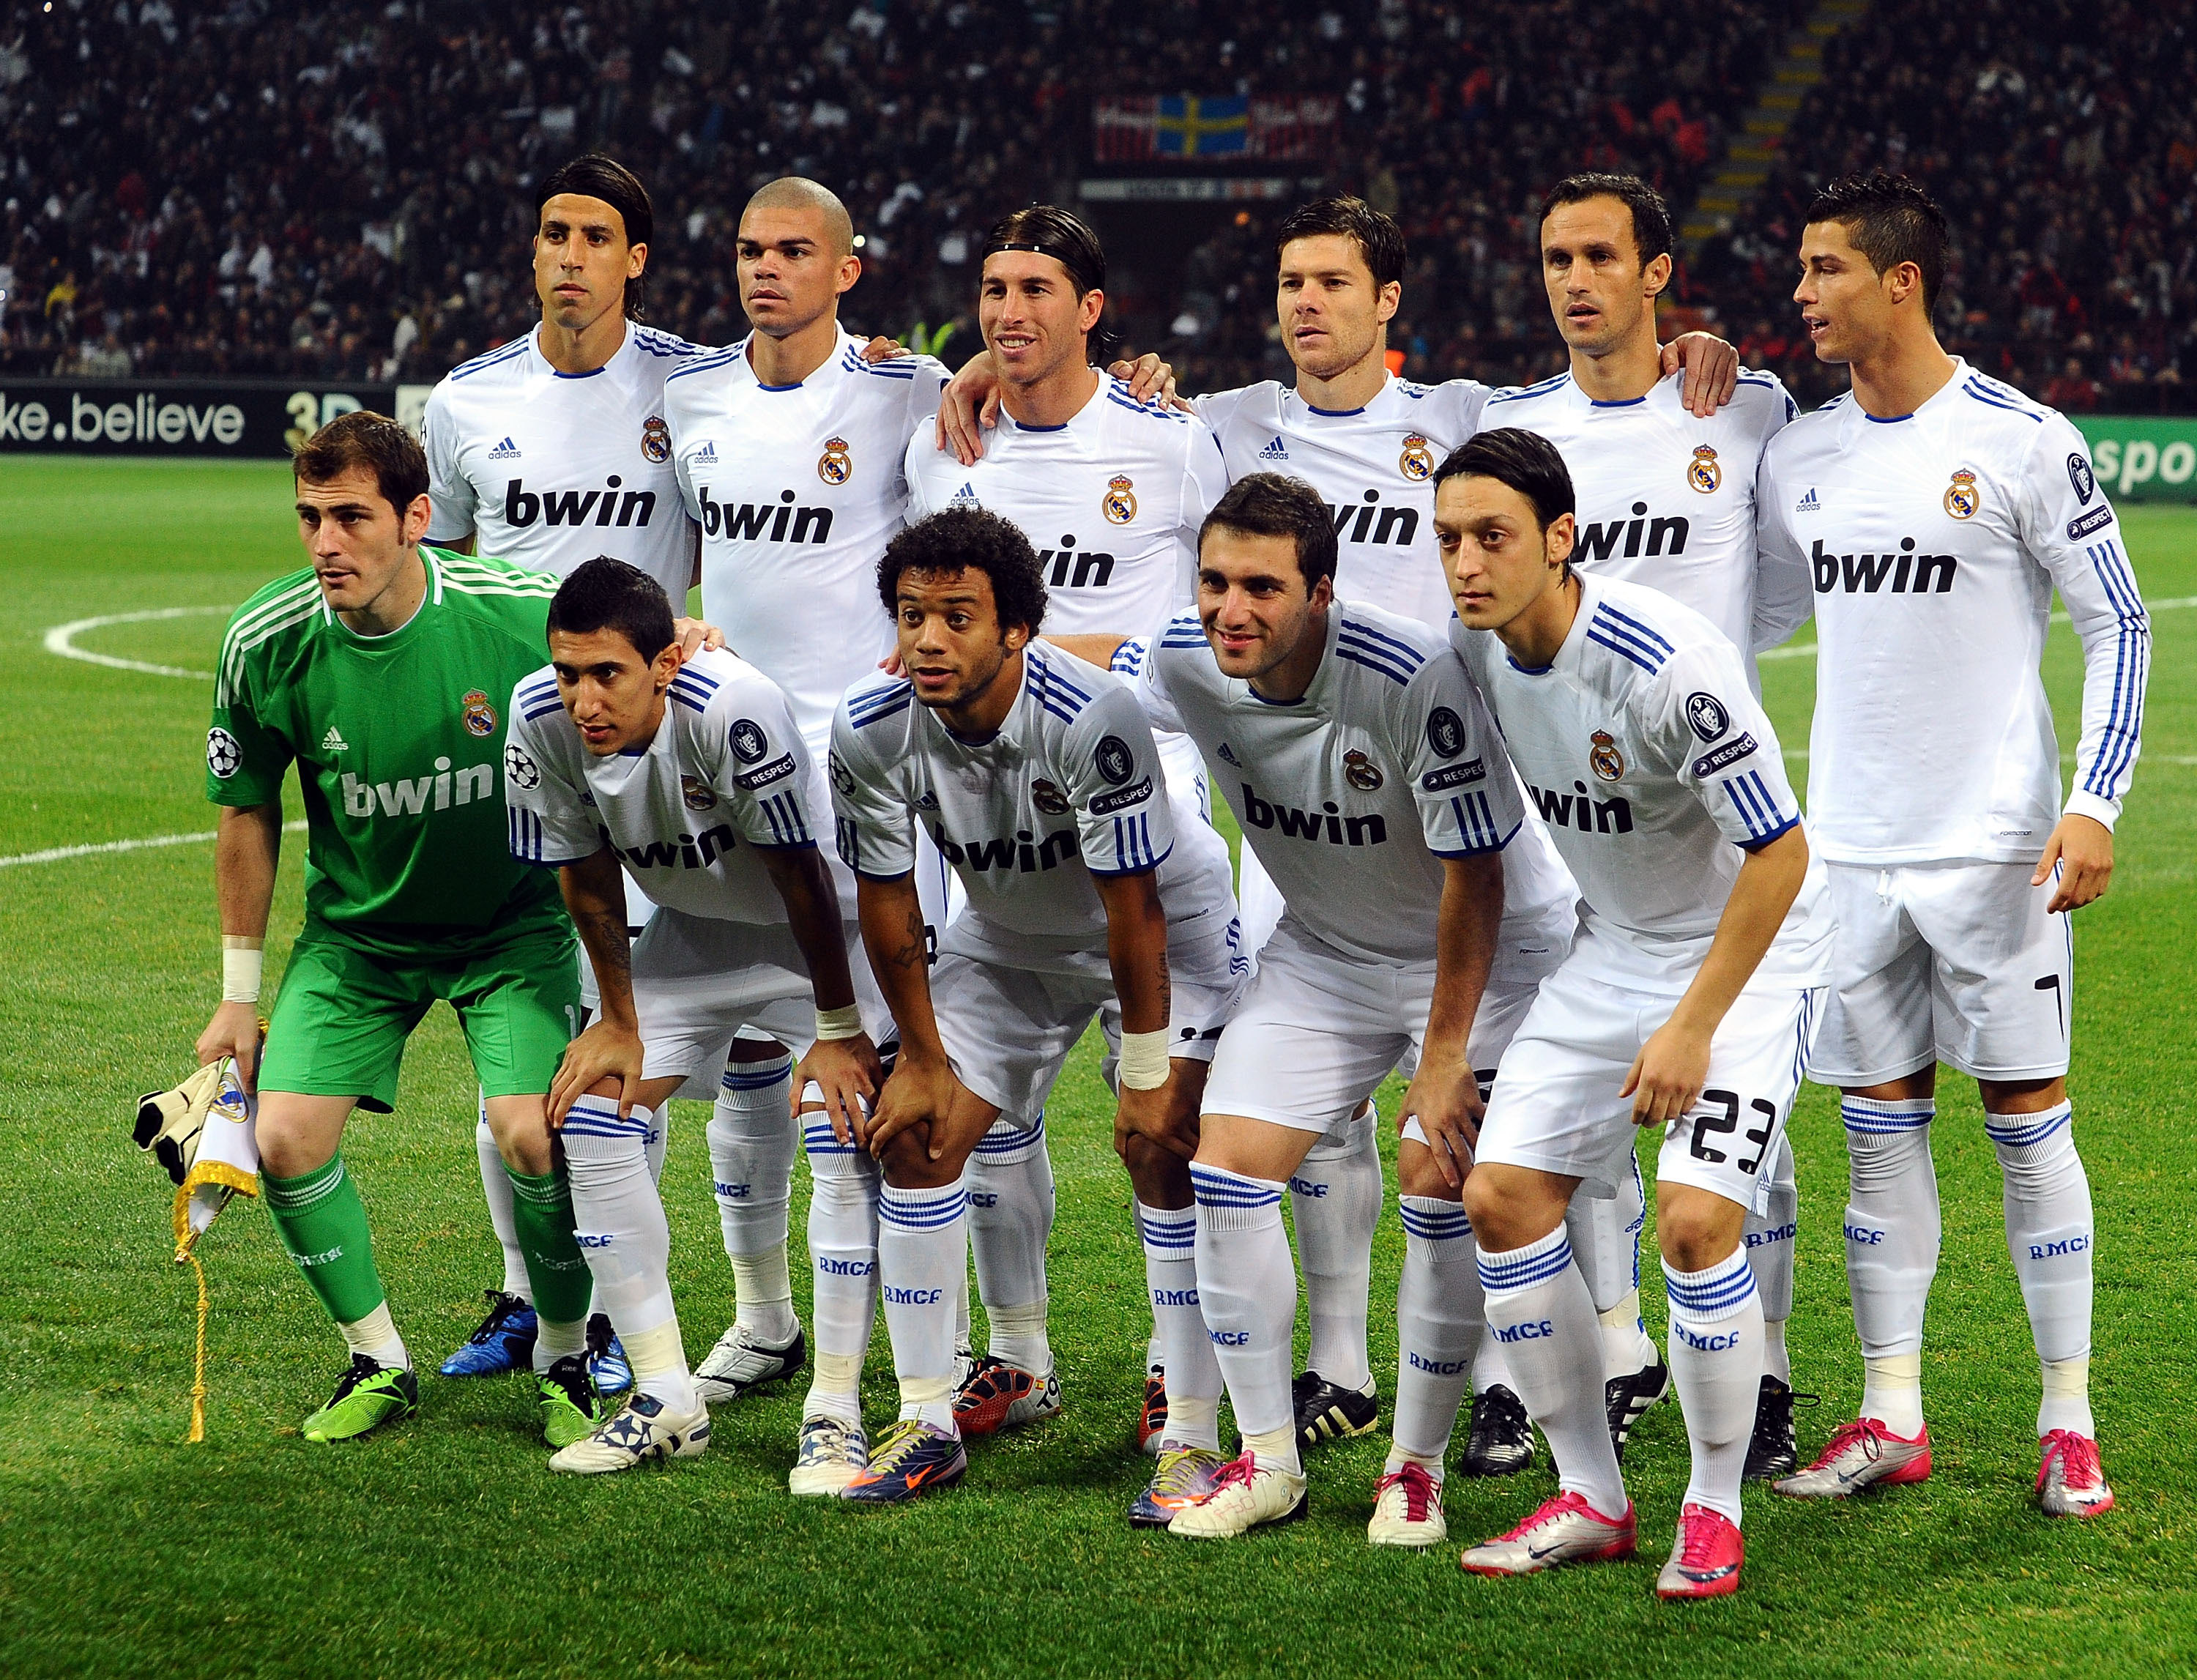 MILAN, ITALY - NOVEMBER 03: Team of Real Madrid pose for photographers during the Uefa Champions League group G match between AC Milan and Real Madrid at Stadio Giuseppe Meazza on November 3, 2010 in Milan, Italy.  (Photo by Massimo Cebrelli/Getty Images)